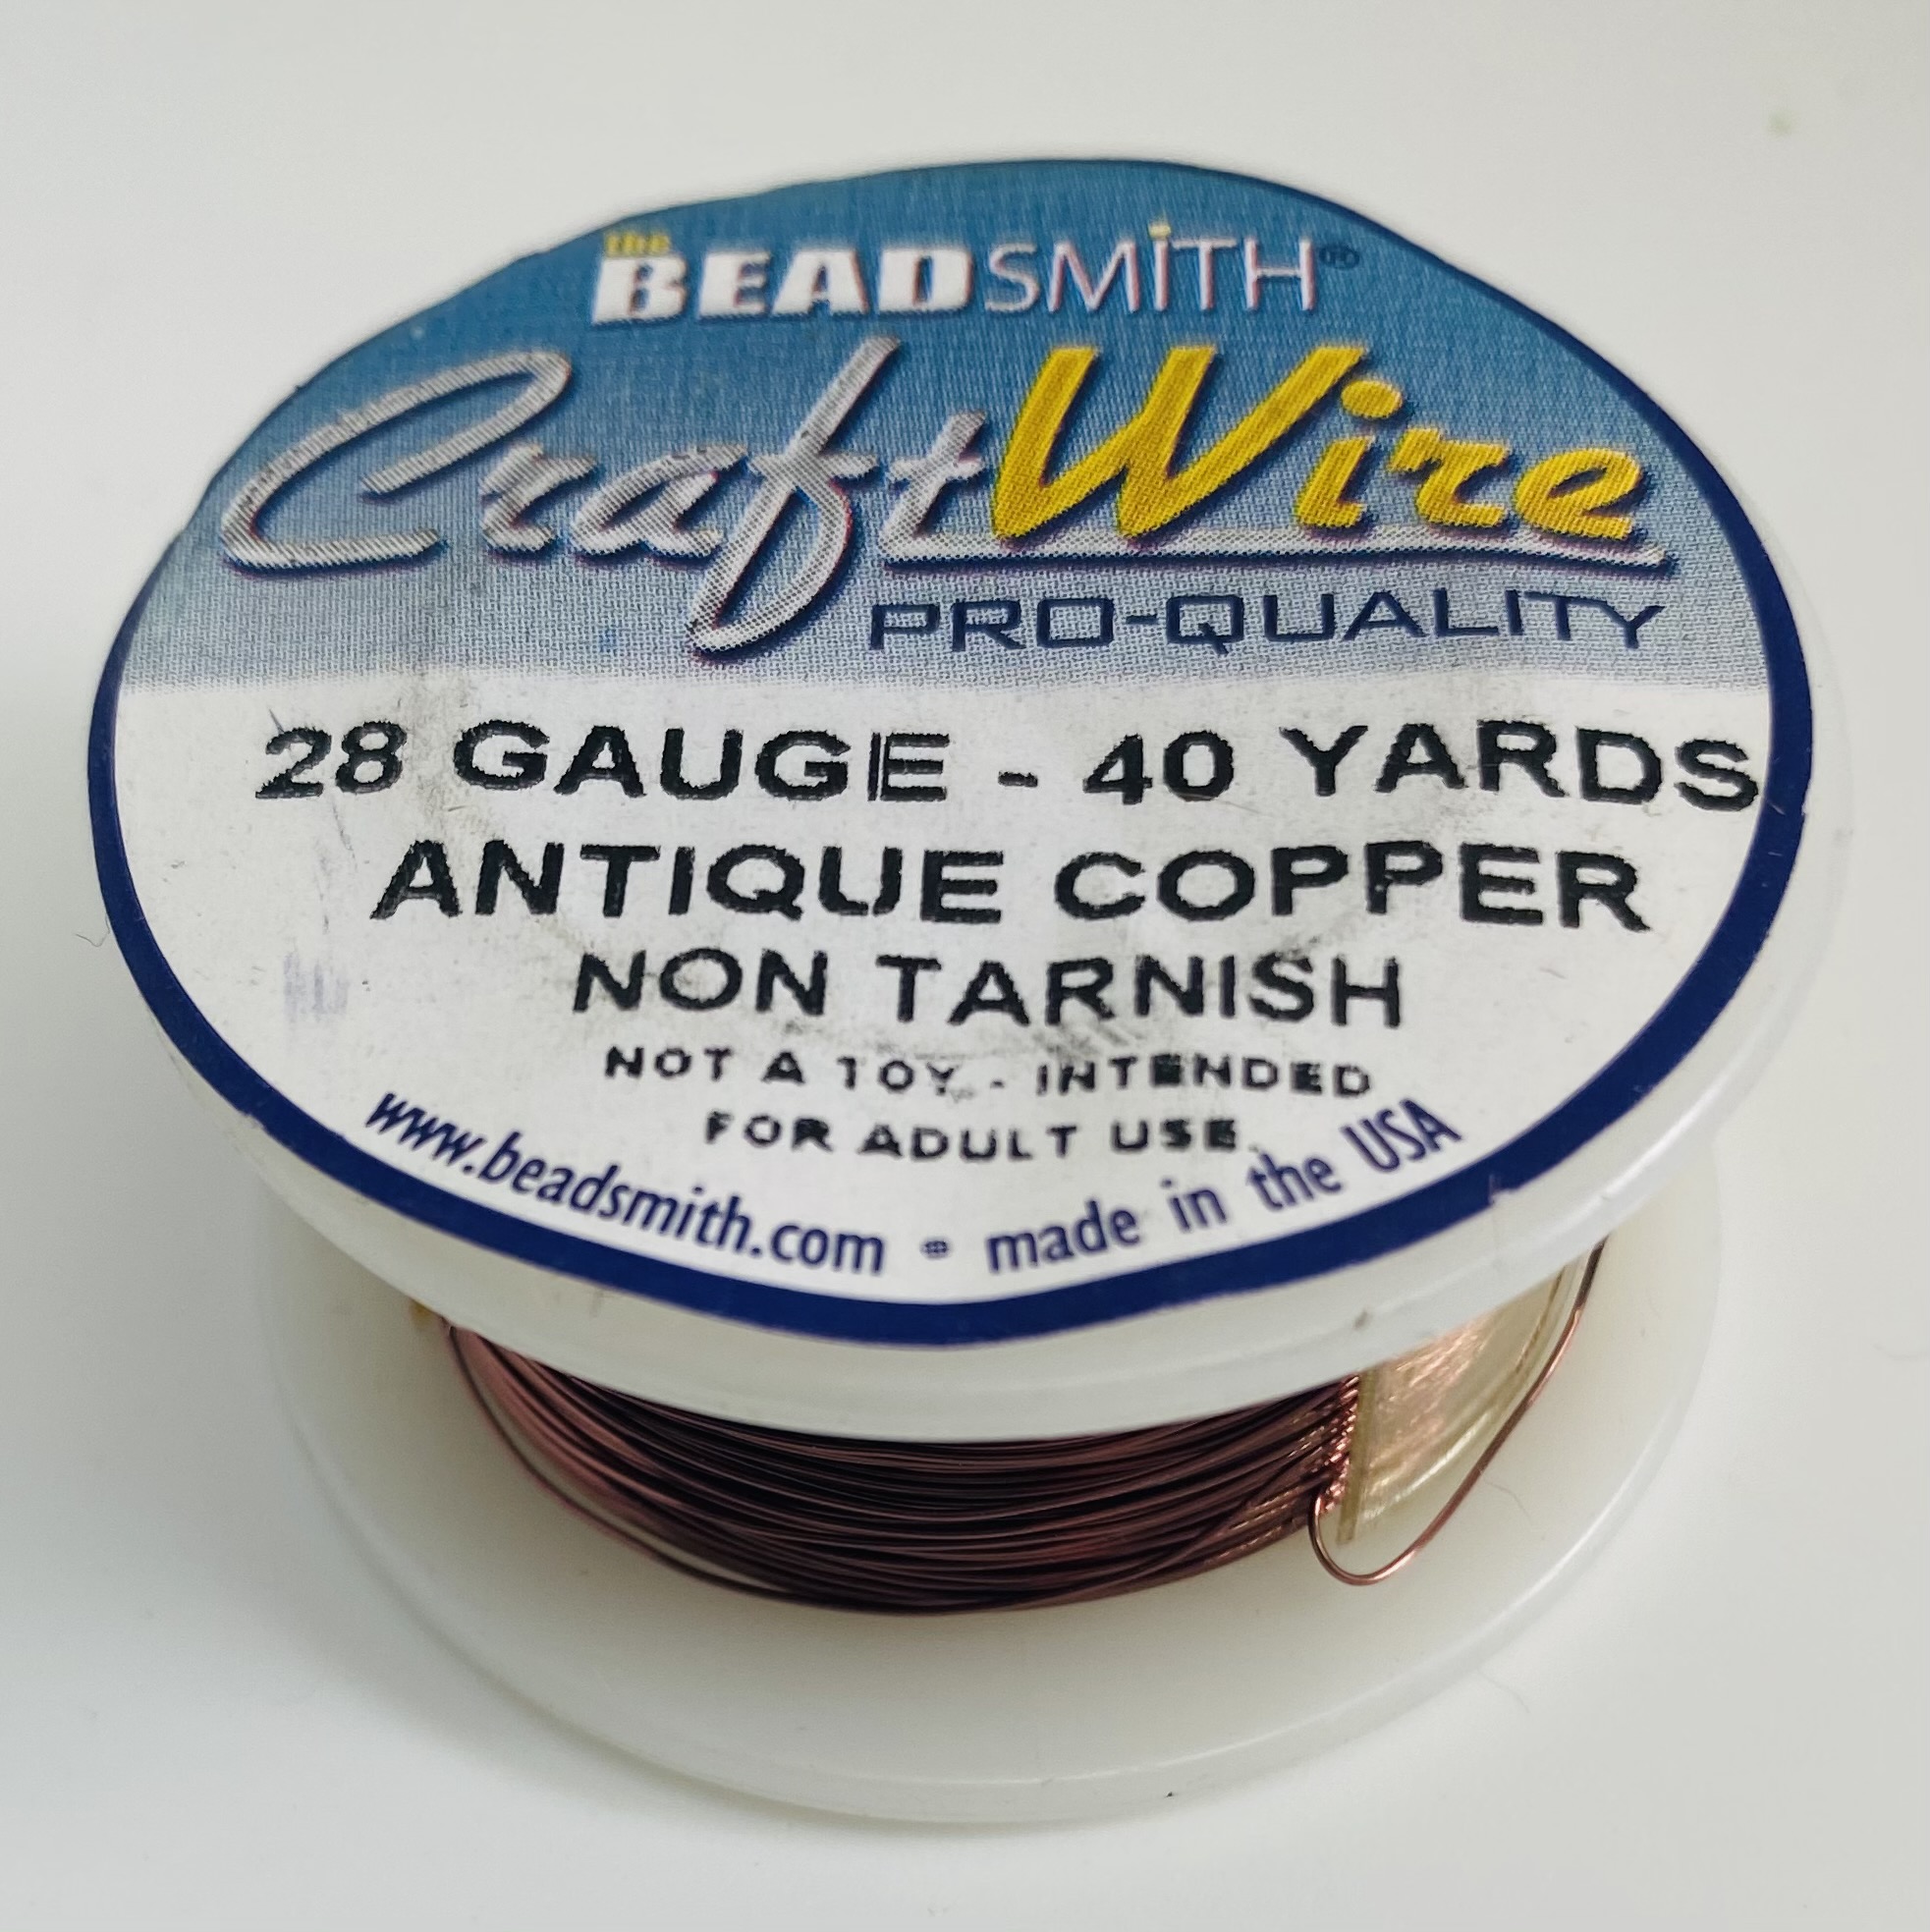 the　Piecez　28　round,　ANTIQUE　(36m)　in　Preciouz　RESISTANT　gauge.　spool　40-yard　COPPER,　USA.　Collections　TARNISH　copper,　Colour-coated　Made